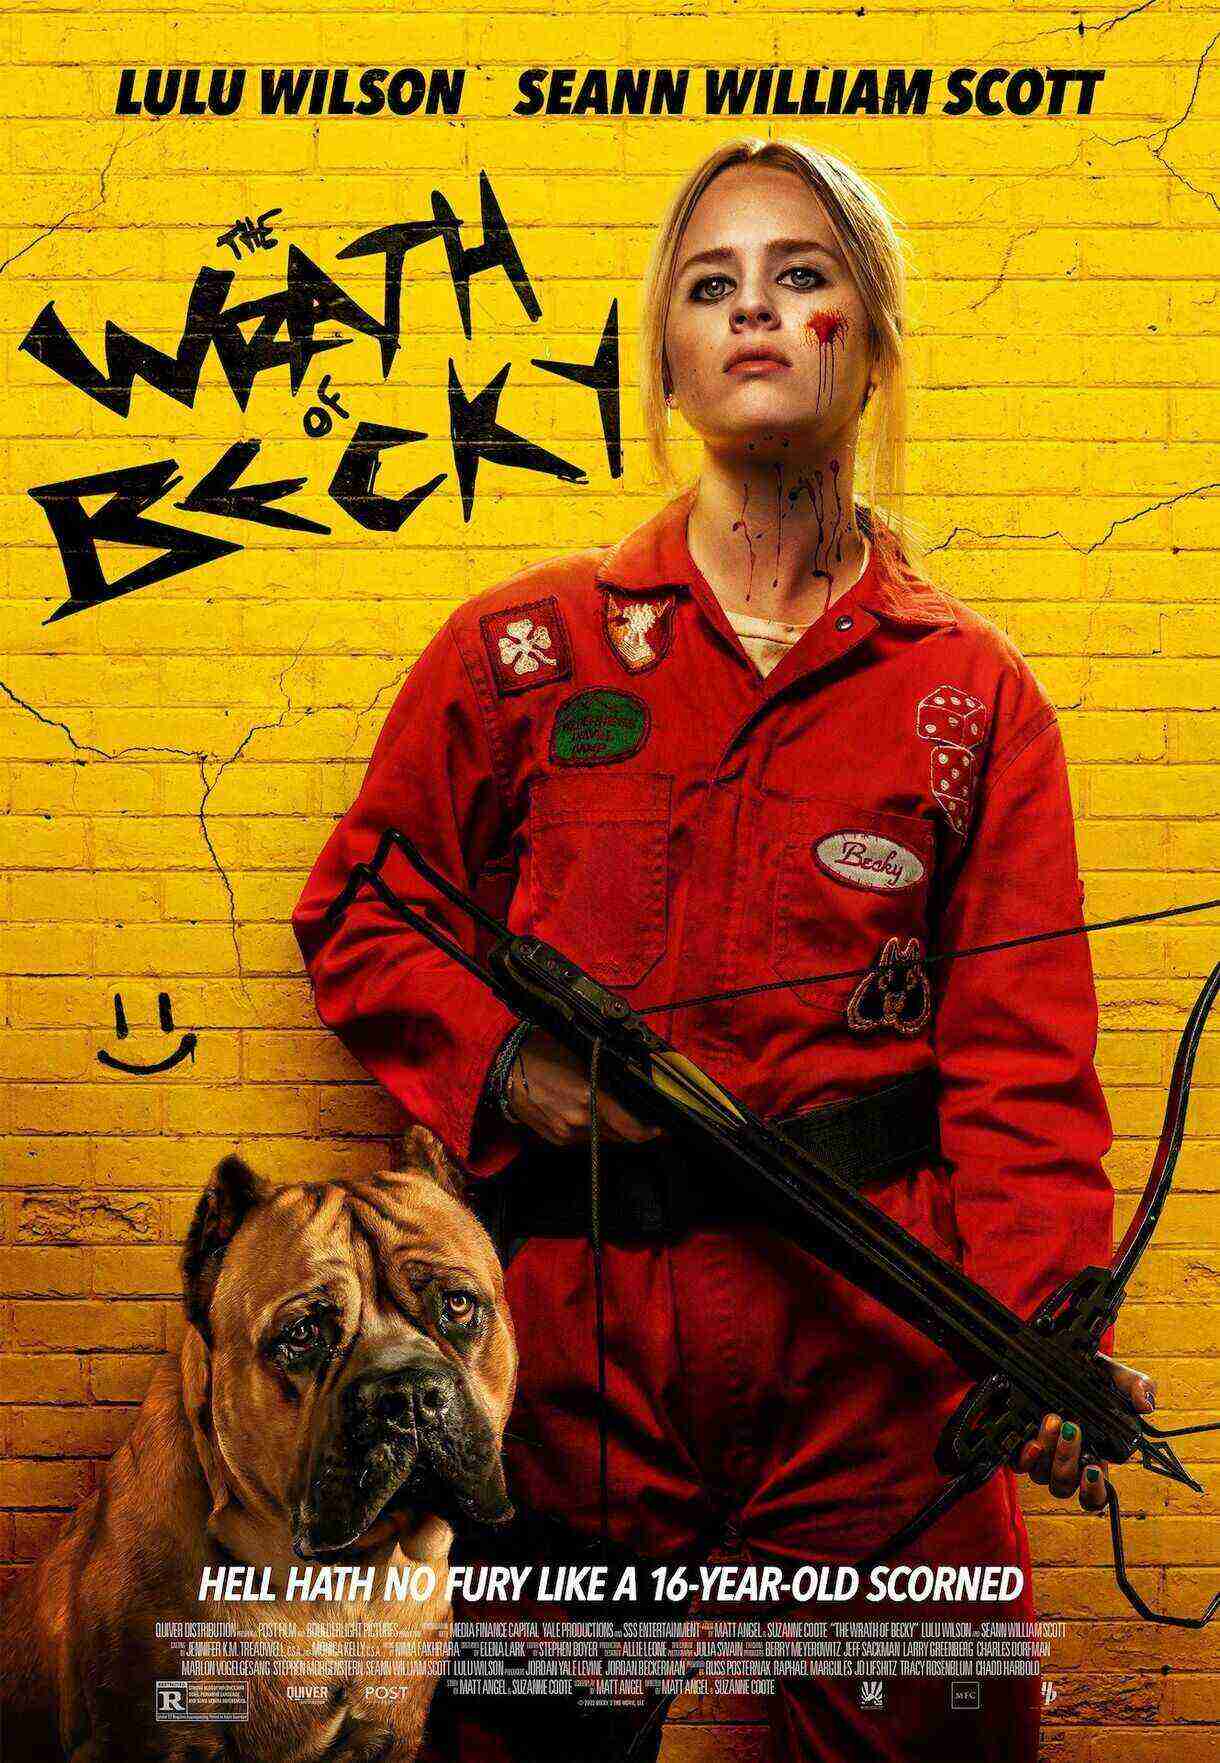 Theatrical poster for The Wrath Of Becky.